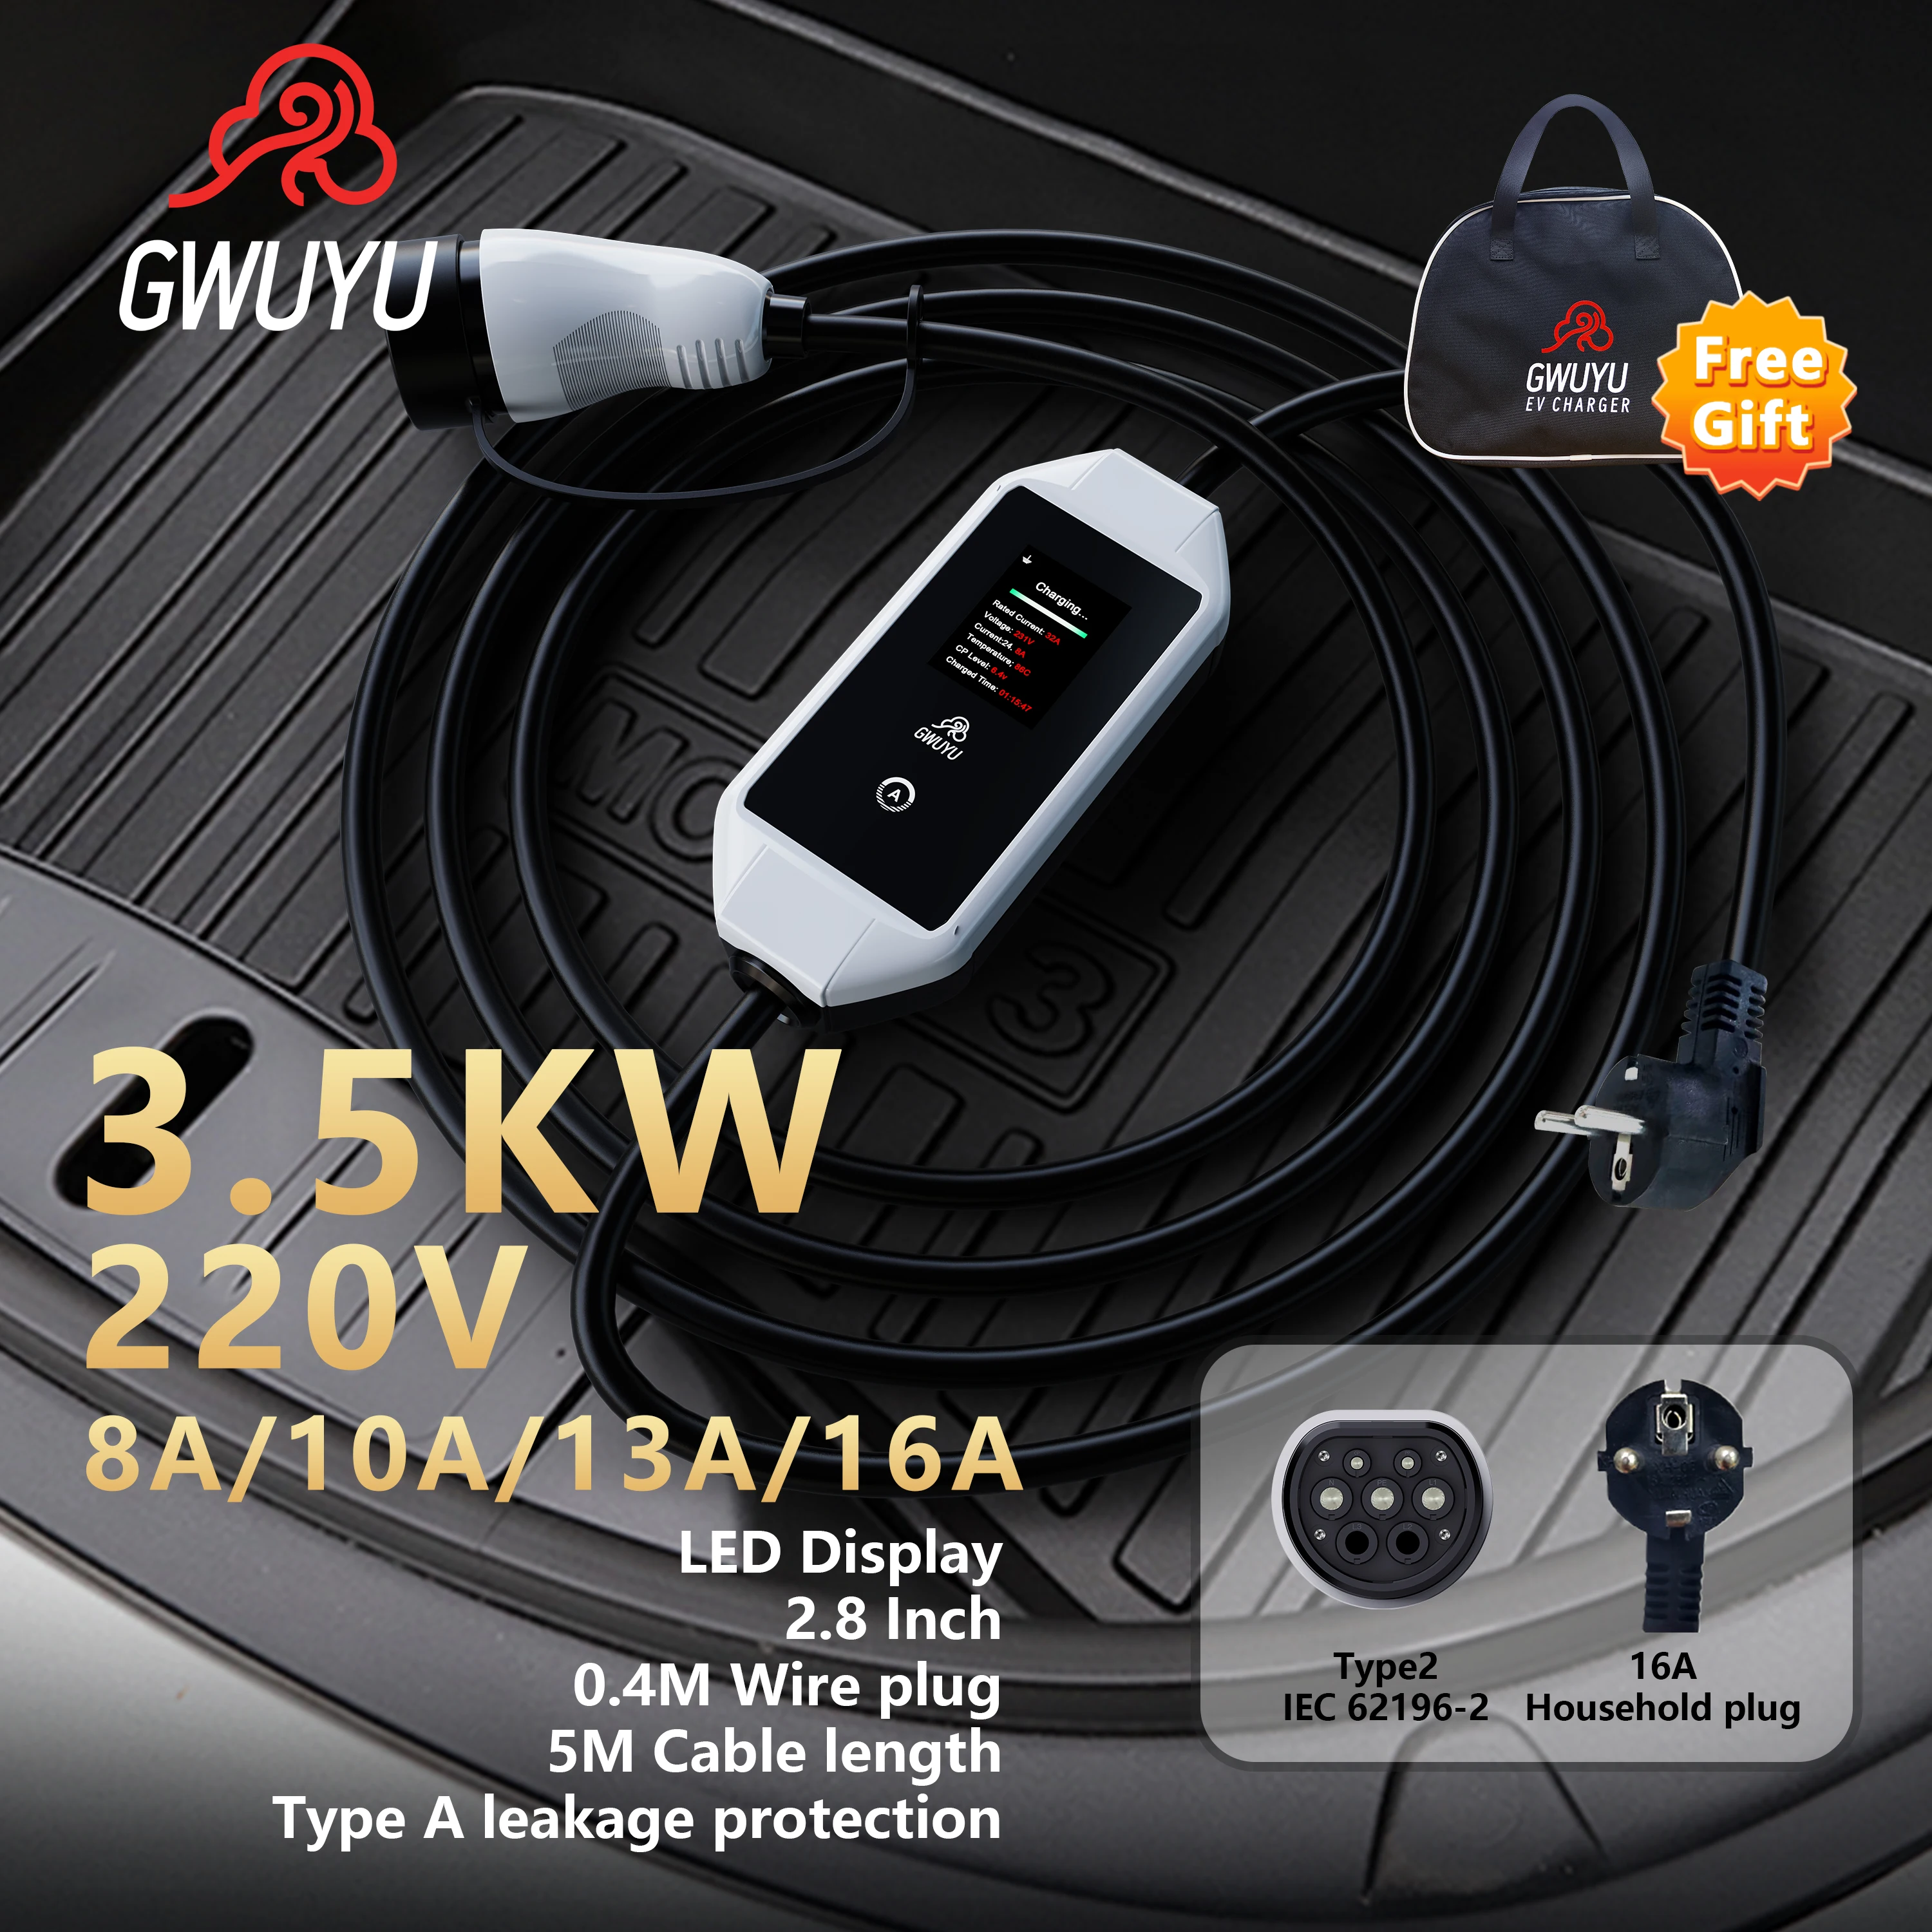 

GWUYU M64 EV Portable Charger Type 2 Plug Adjustable Current 16A 32A 3.5KW 7.6KW 5M Cable for Electric Vehicle Car 2.8 Inch Led